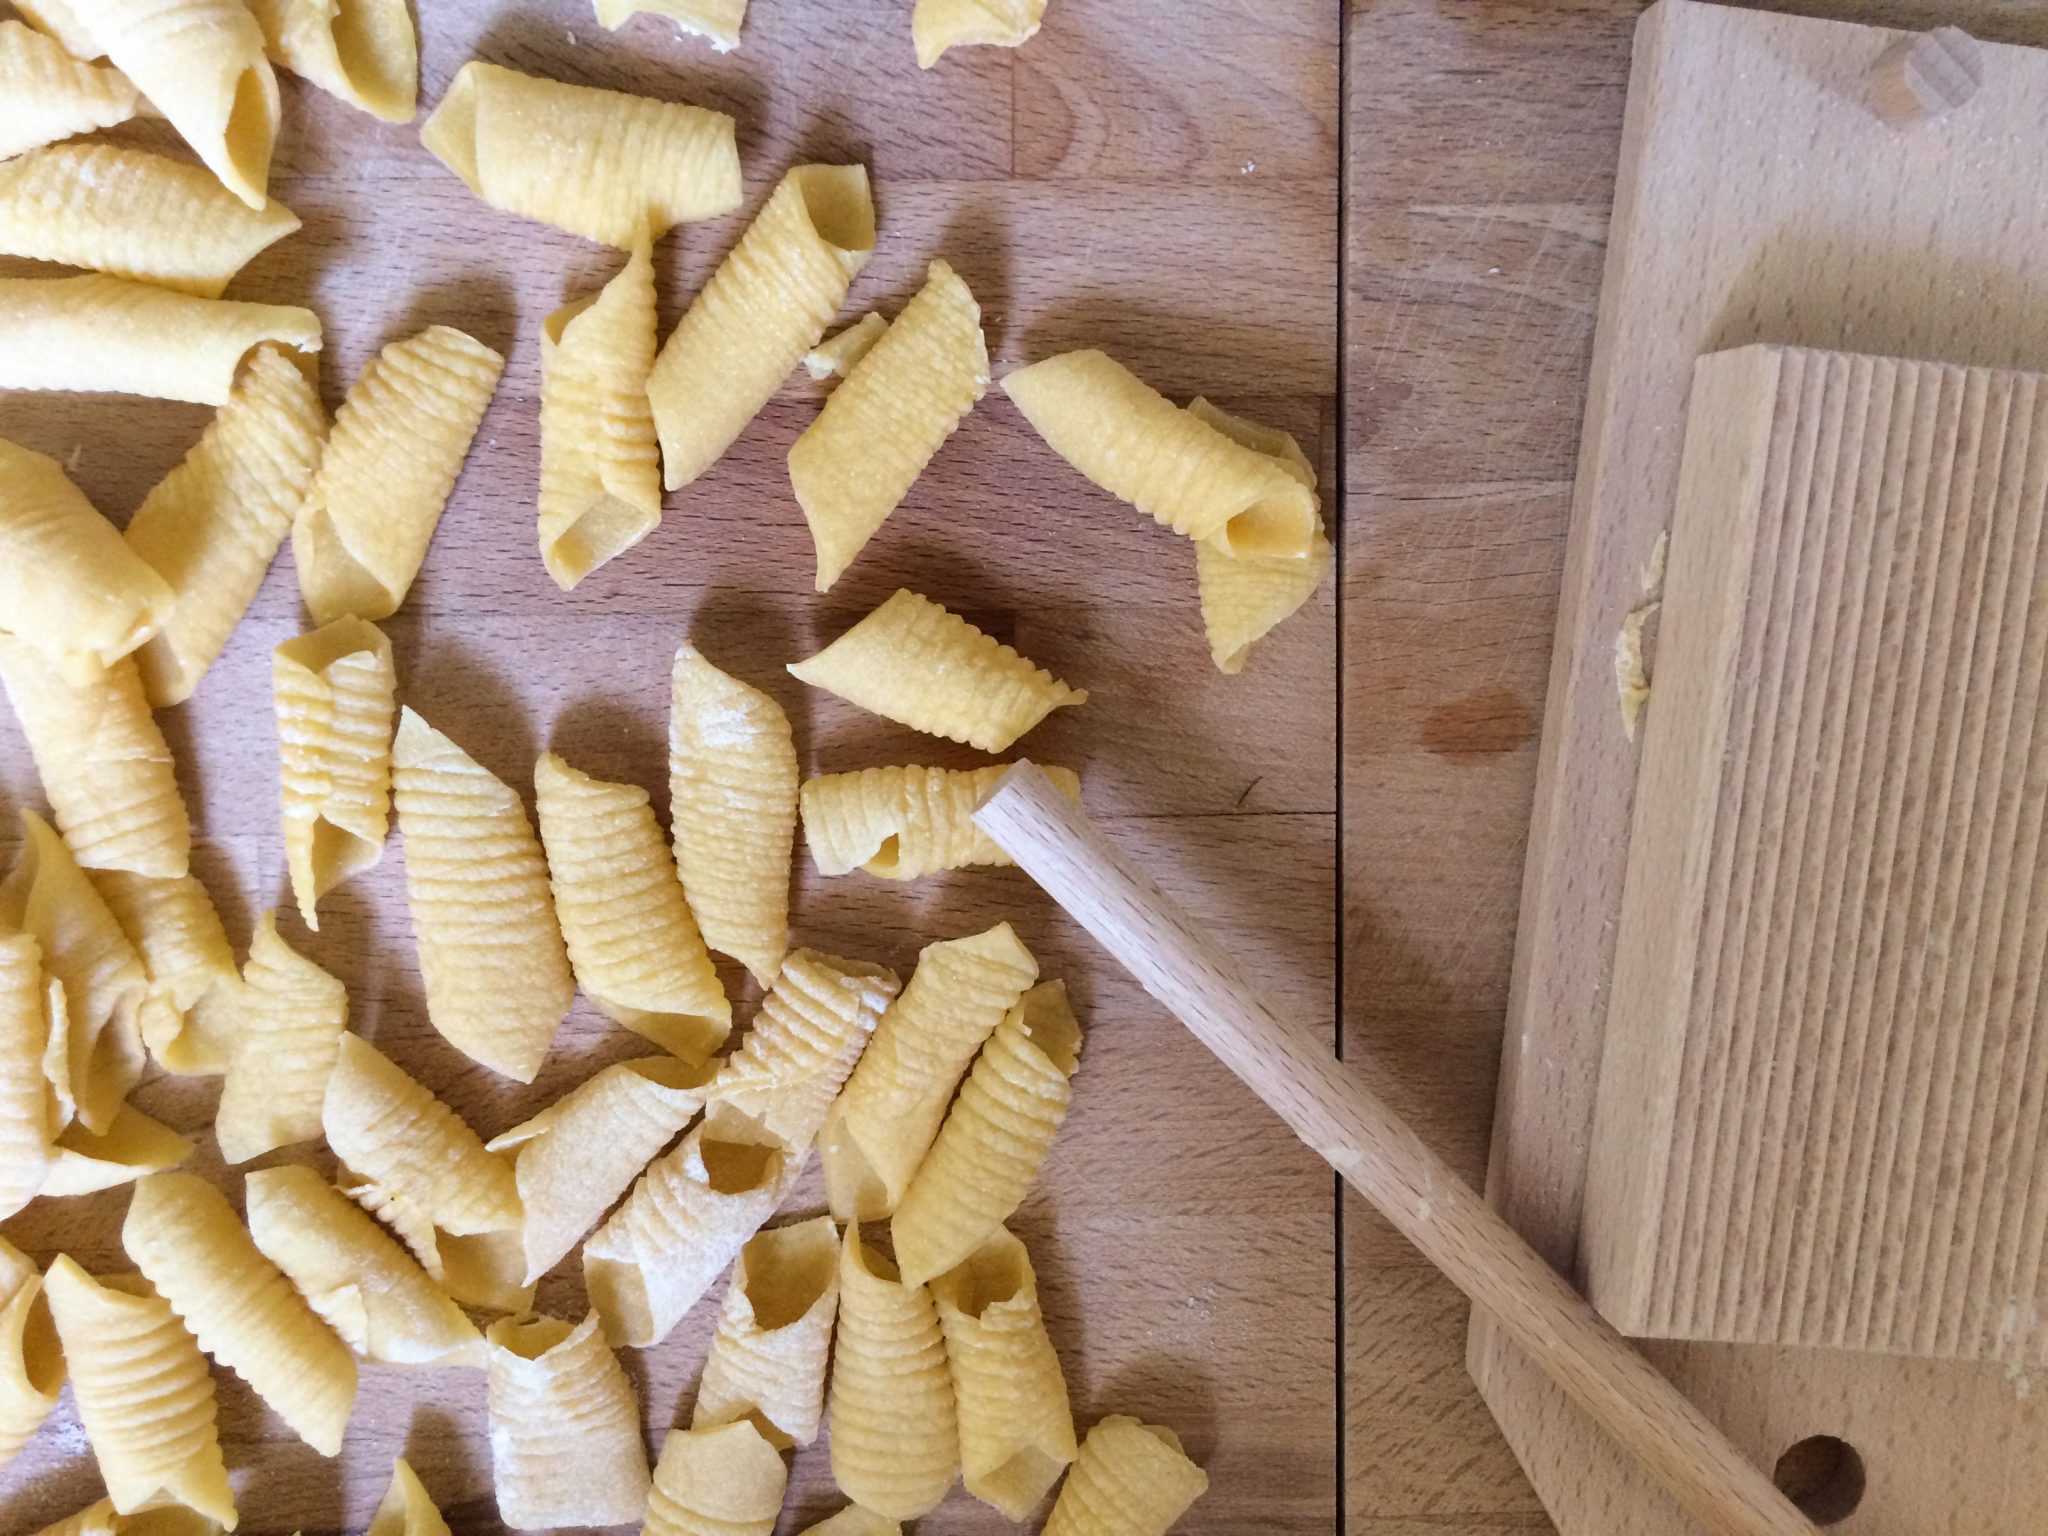 Homemade pasta is delicious, and so easy and fun to make!